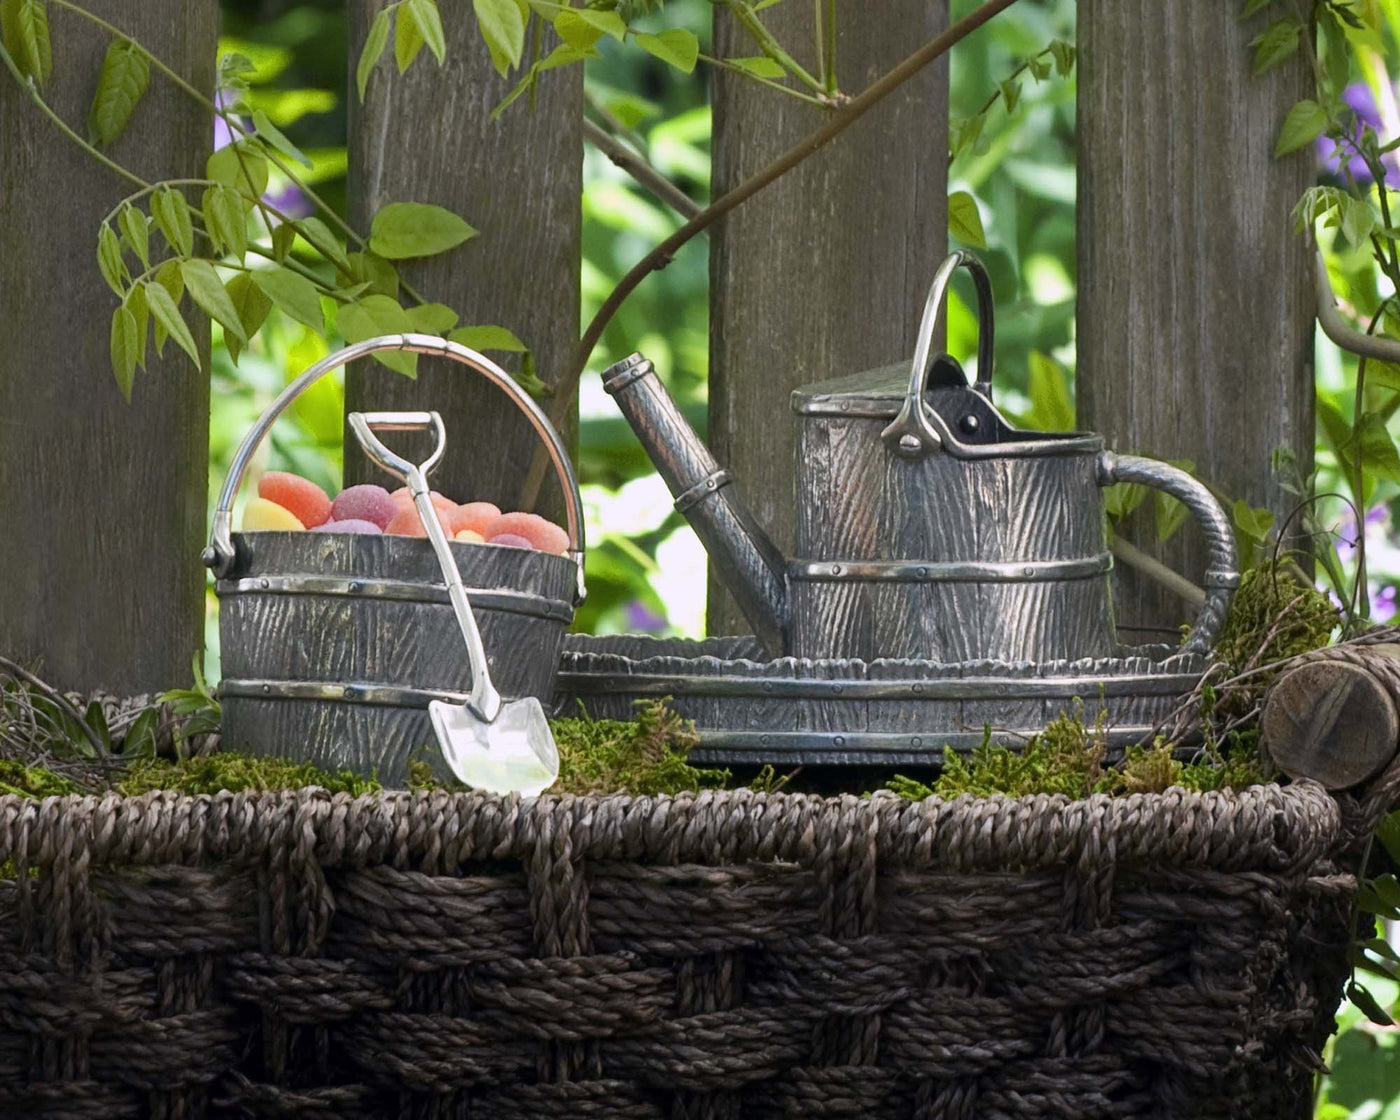 Watering Can Creamer Set